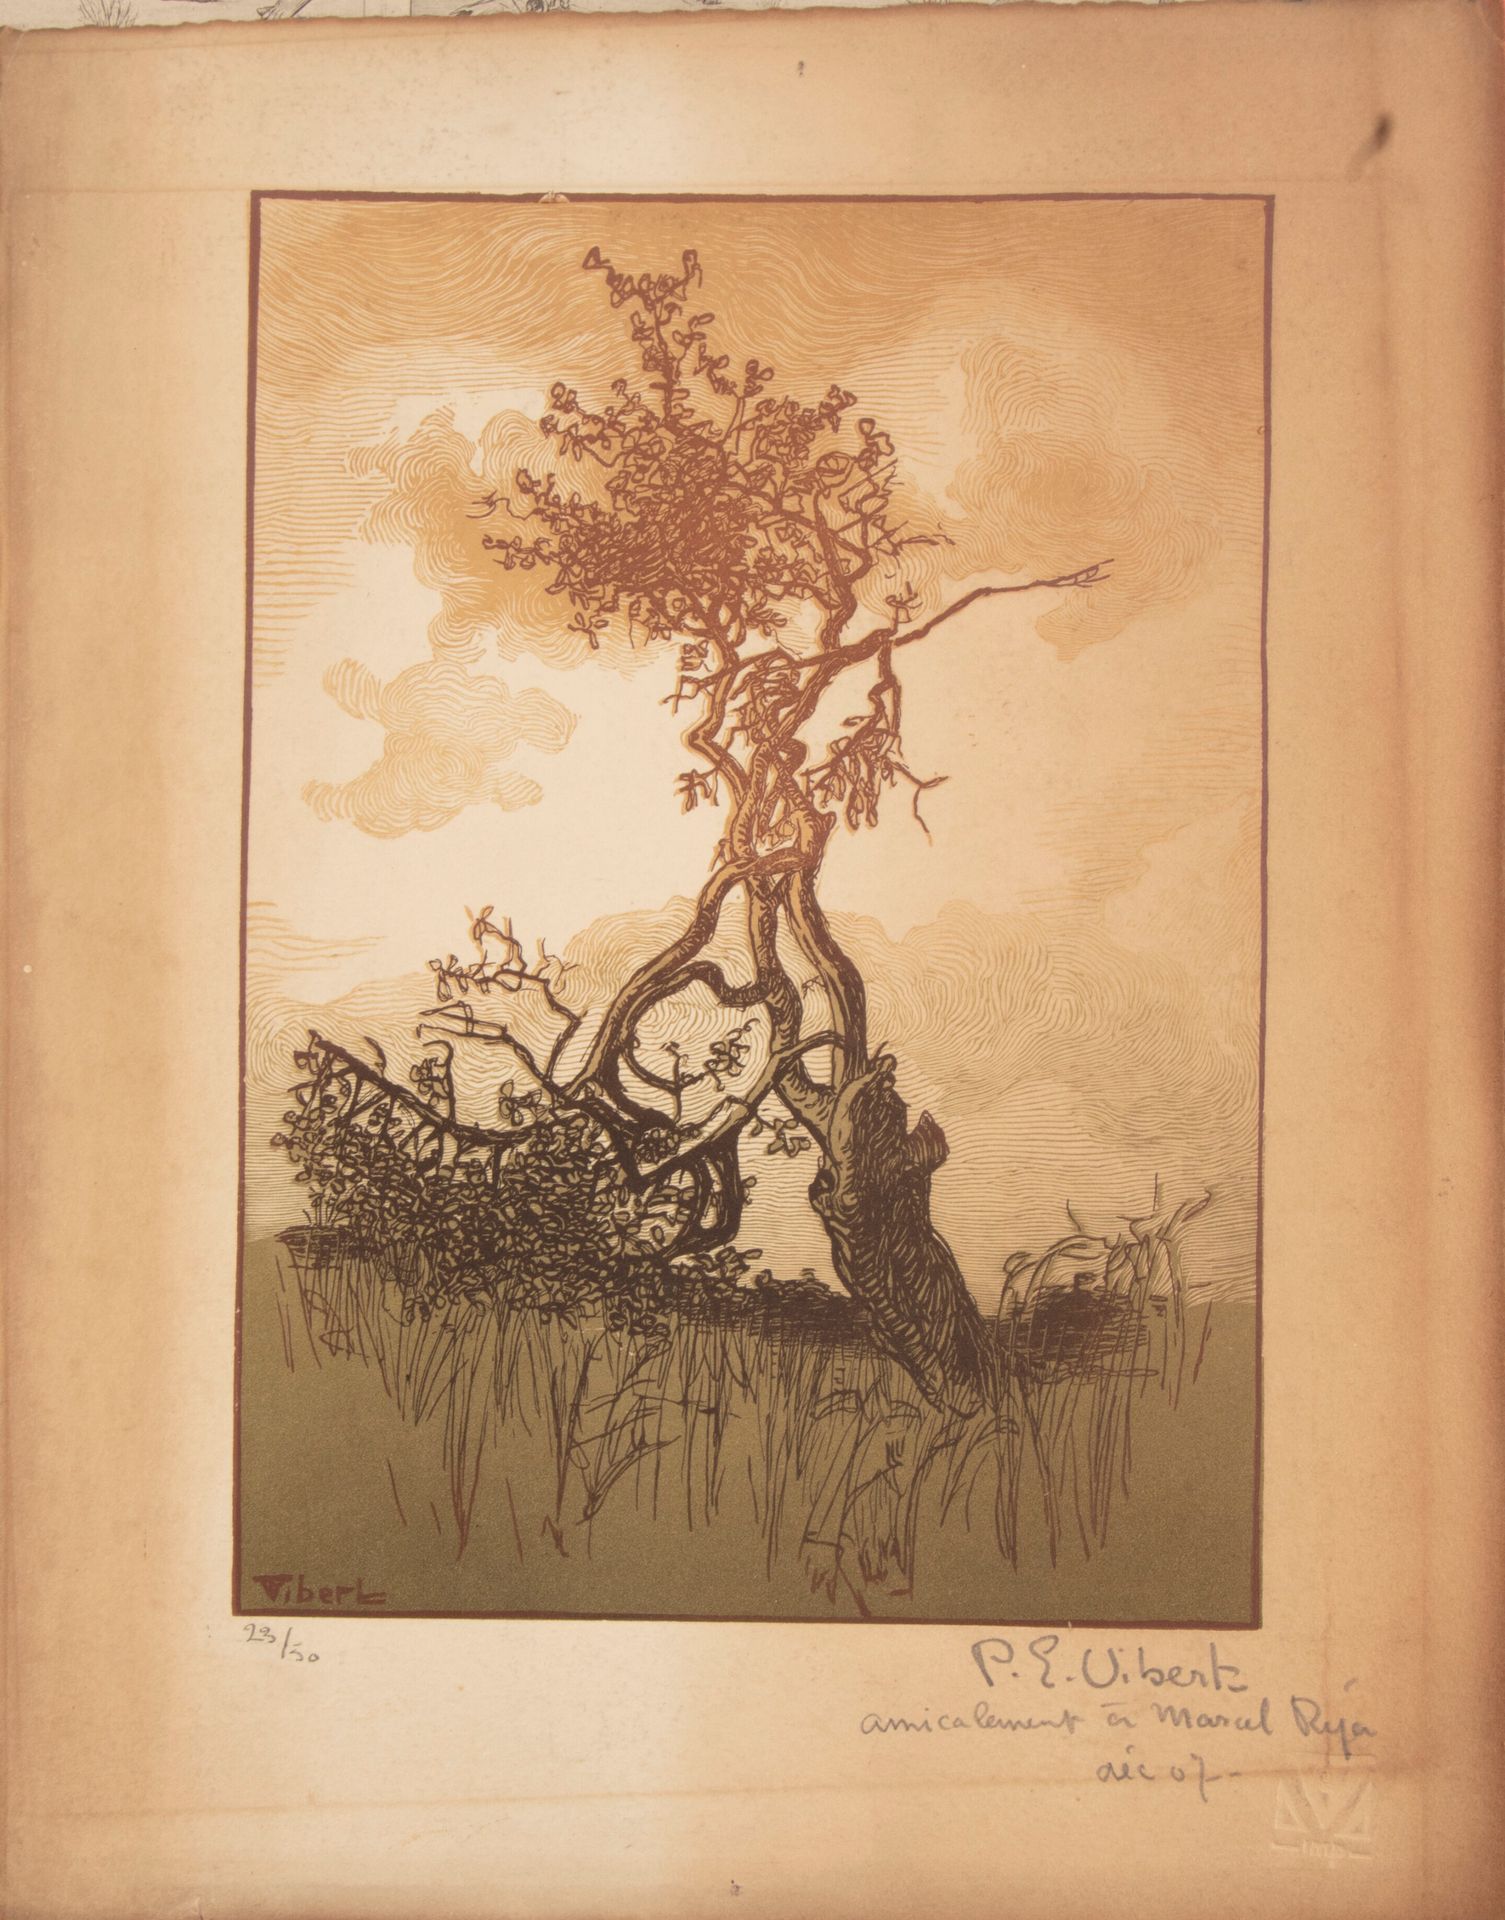 Null Pierre Eugène VIBERT (1875-1937)

Tree

Engraving, countersigned and number&hellip;